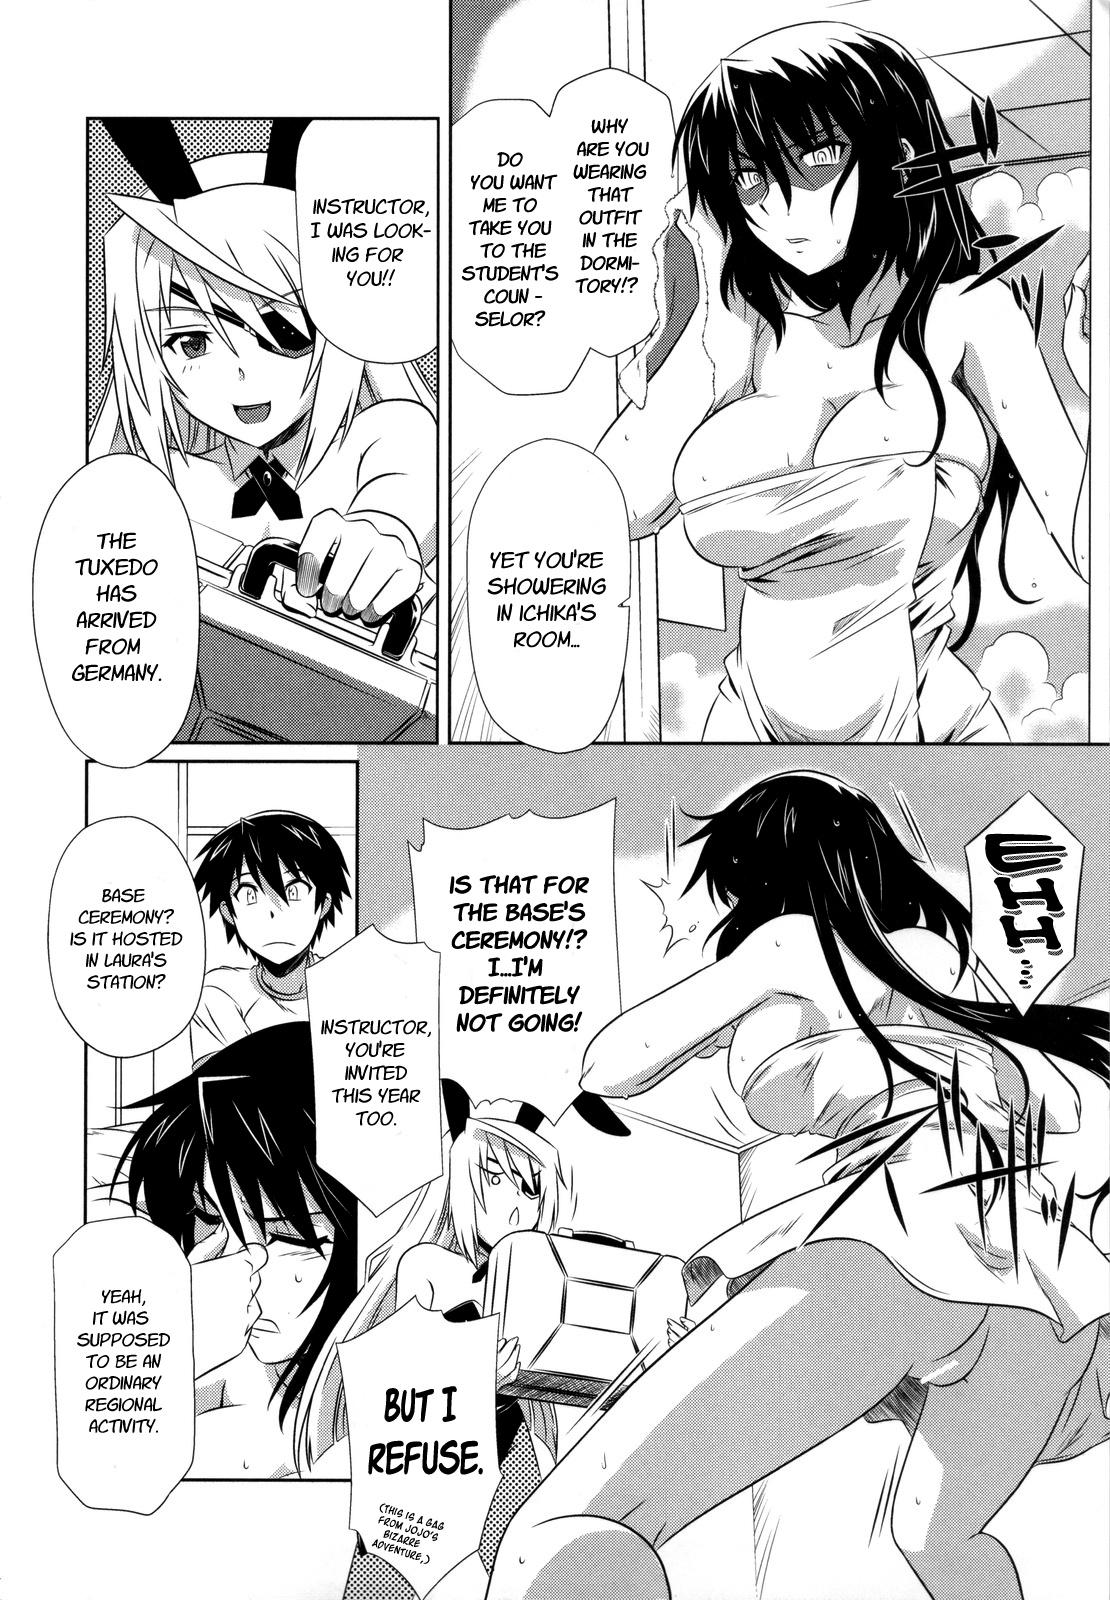 Cumming is Incest Strategy 3 - Infinite stratos 18 Year Old - Page 3